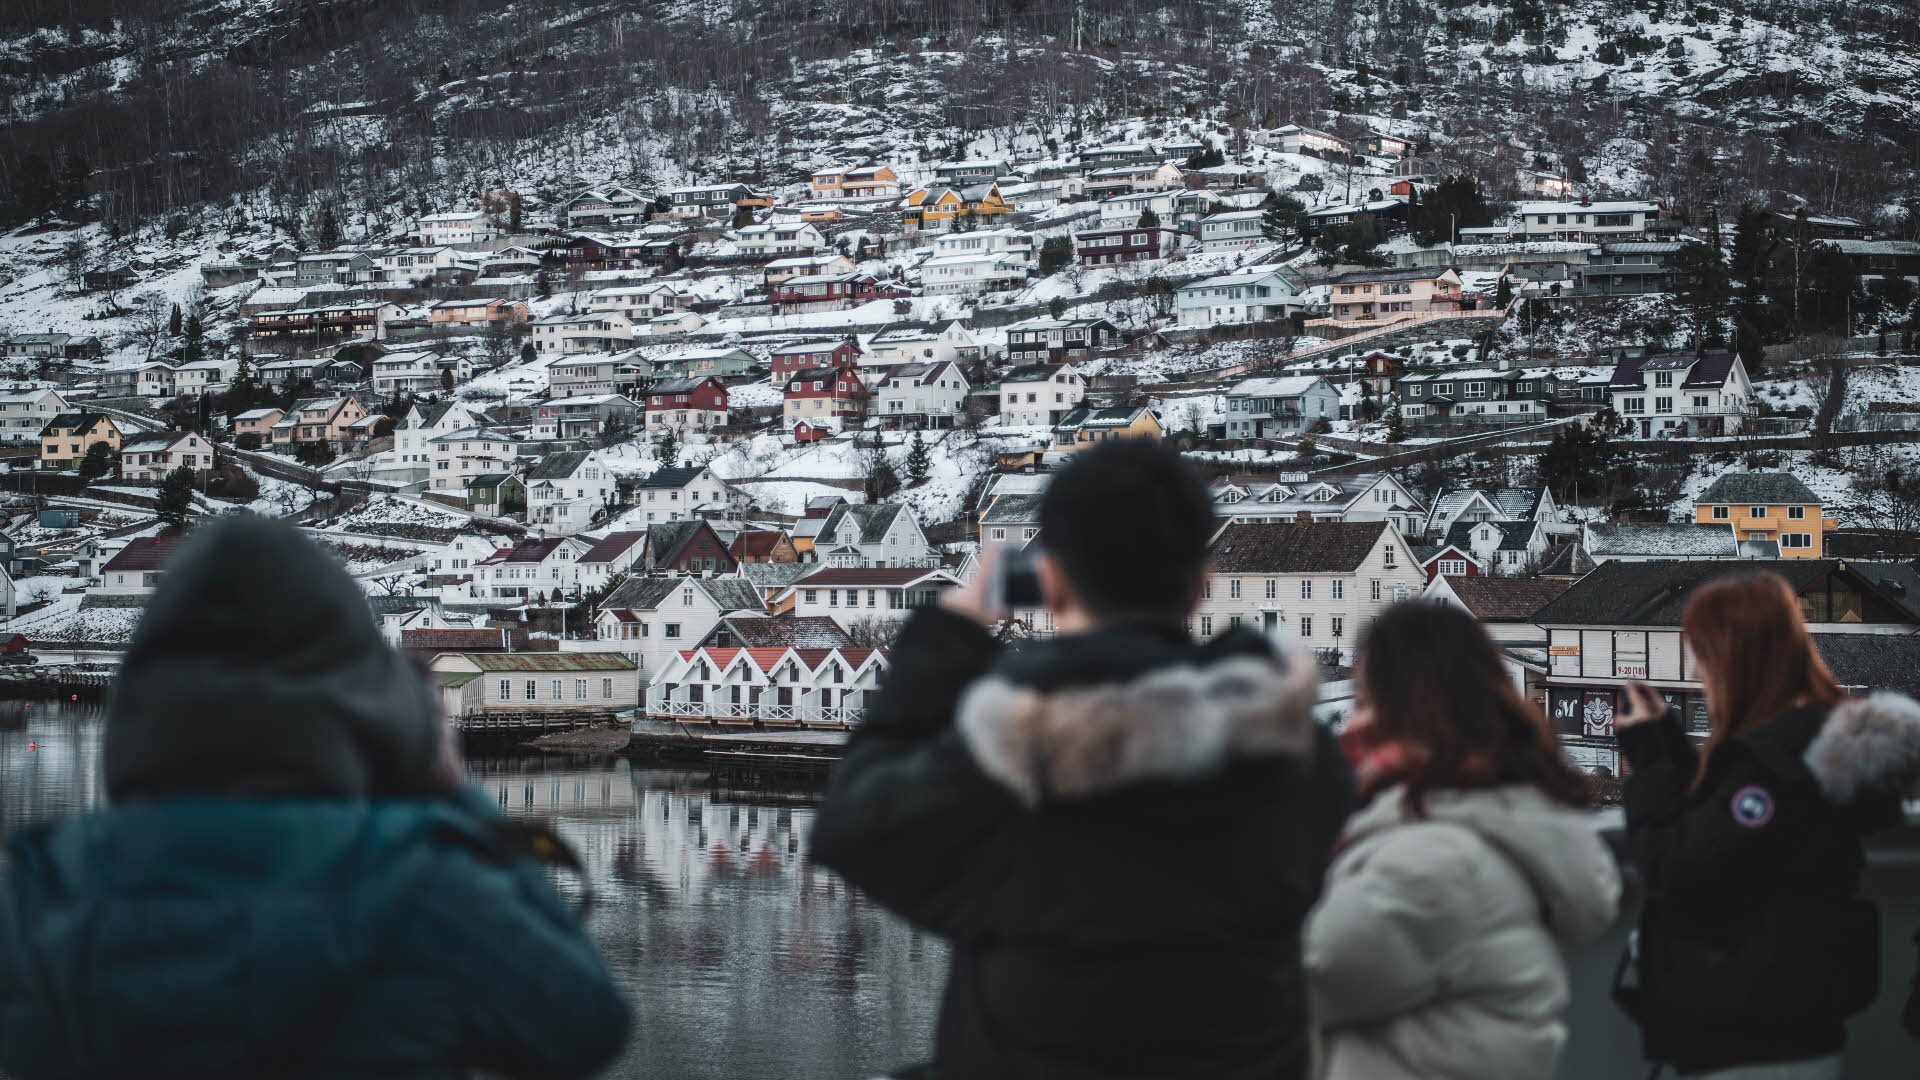 A tourist standing on a boat photographing Aurland village centre in the winter